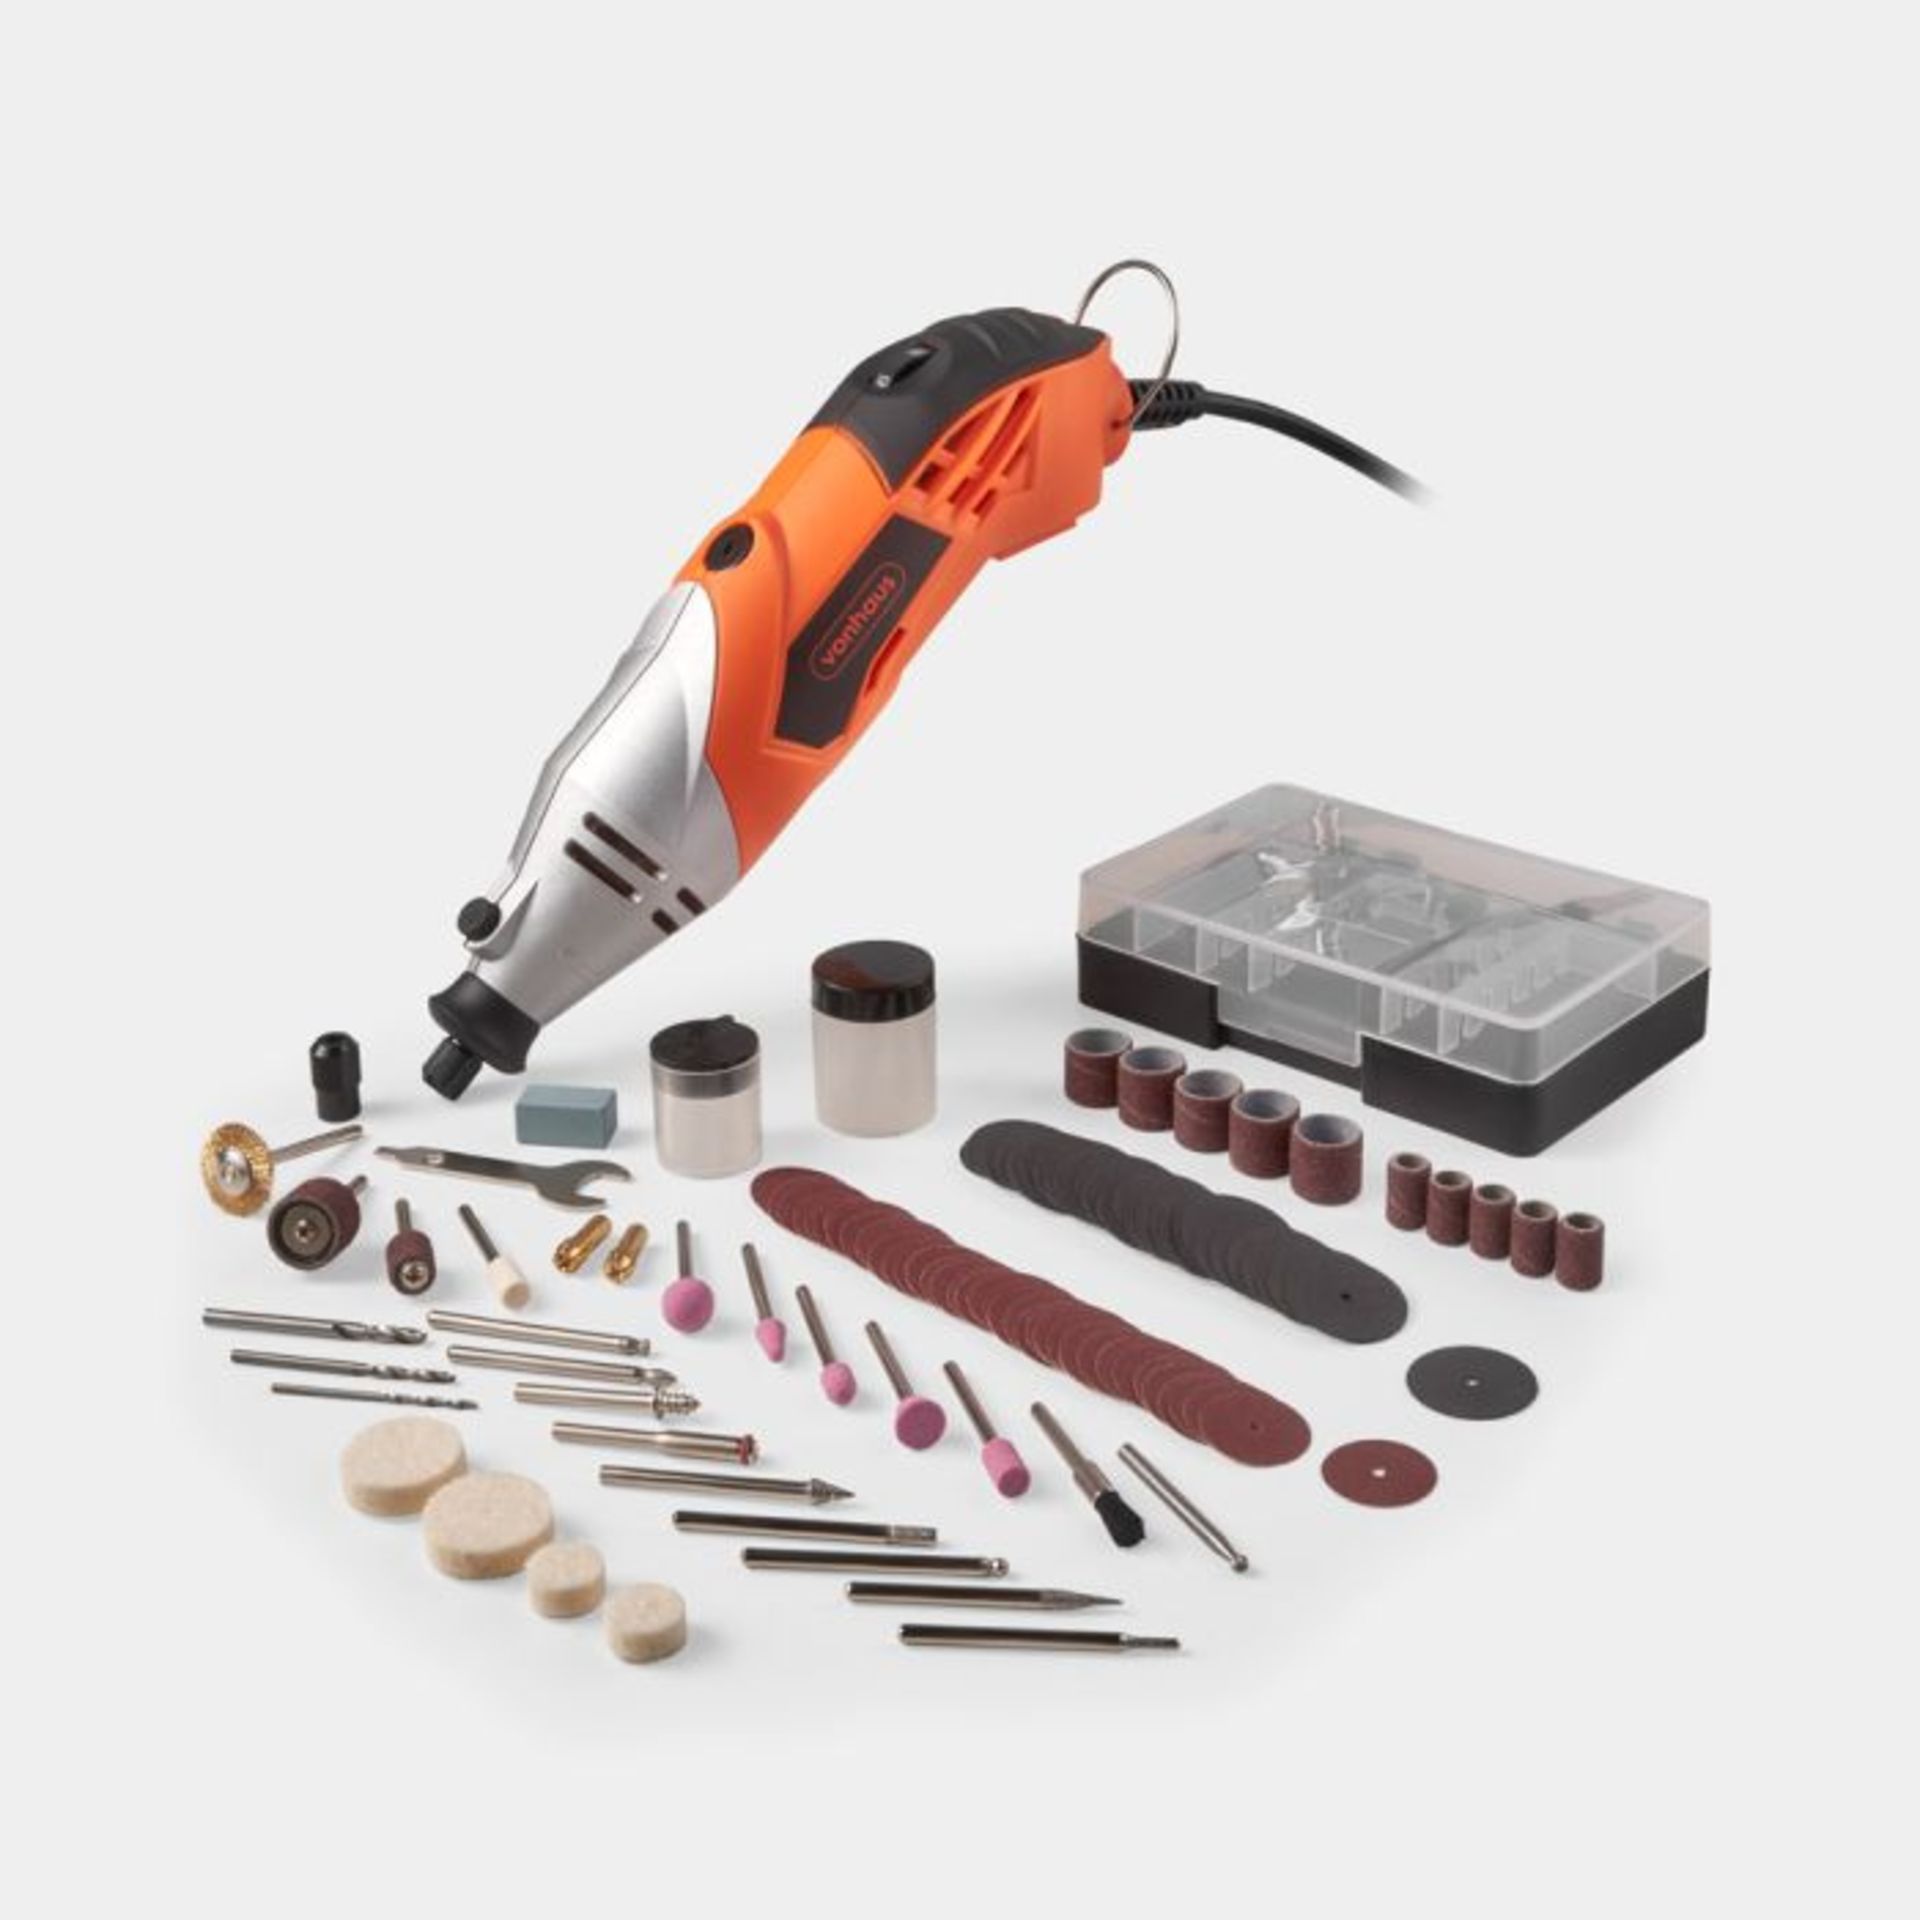 Rotary Multitool & Accessory Set. - ER42. Ideal for a wide range of DIY, hobby, woodwork,